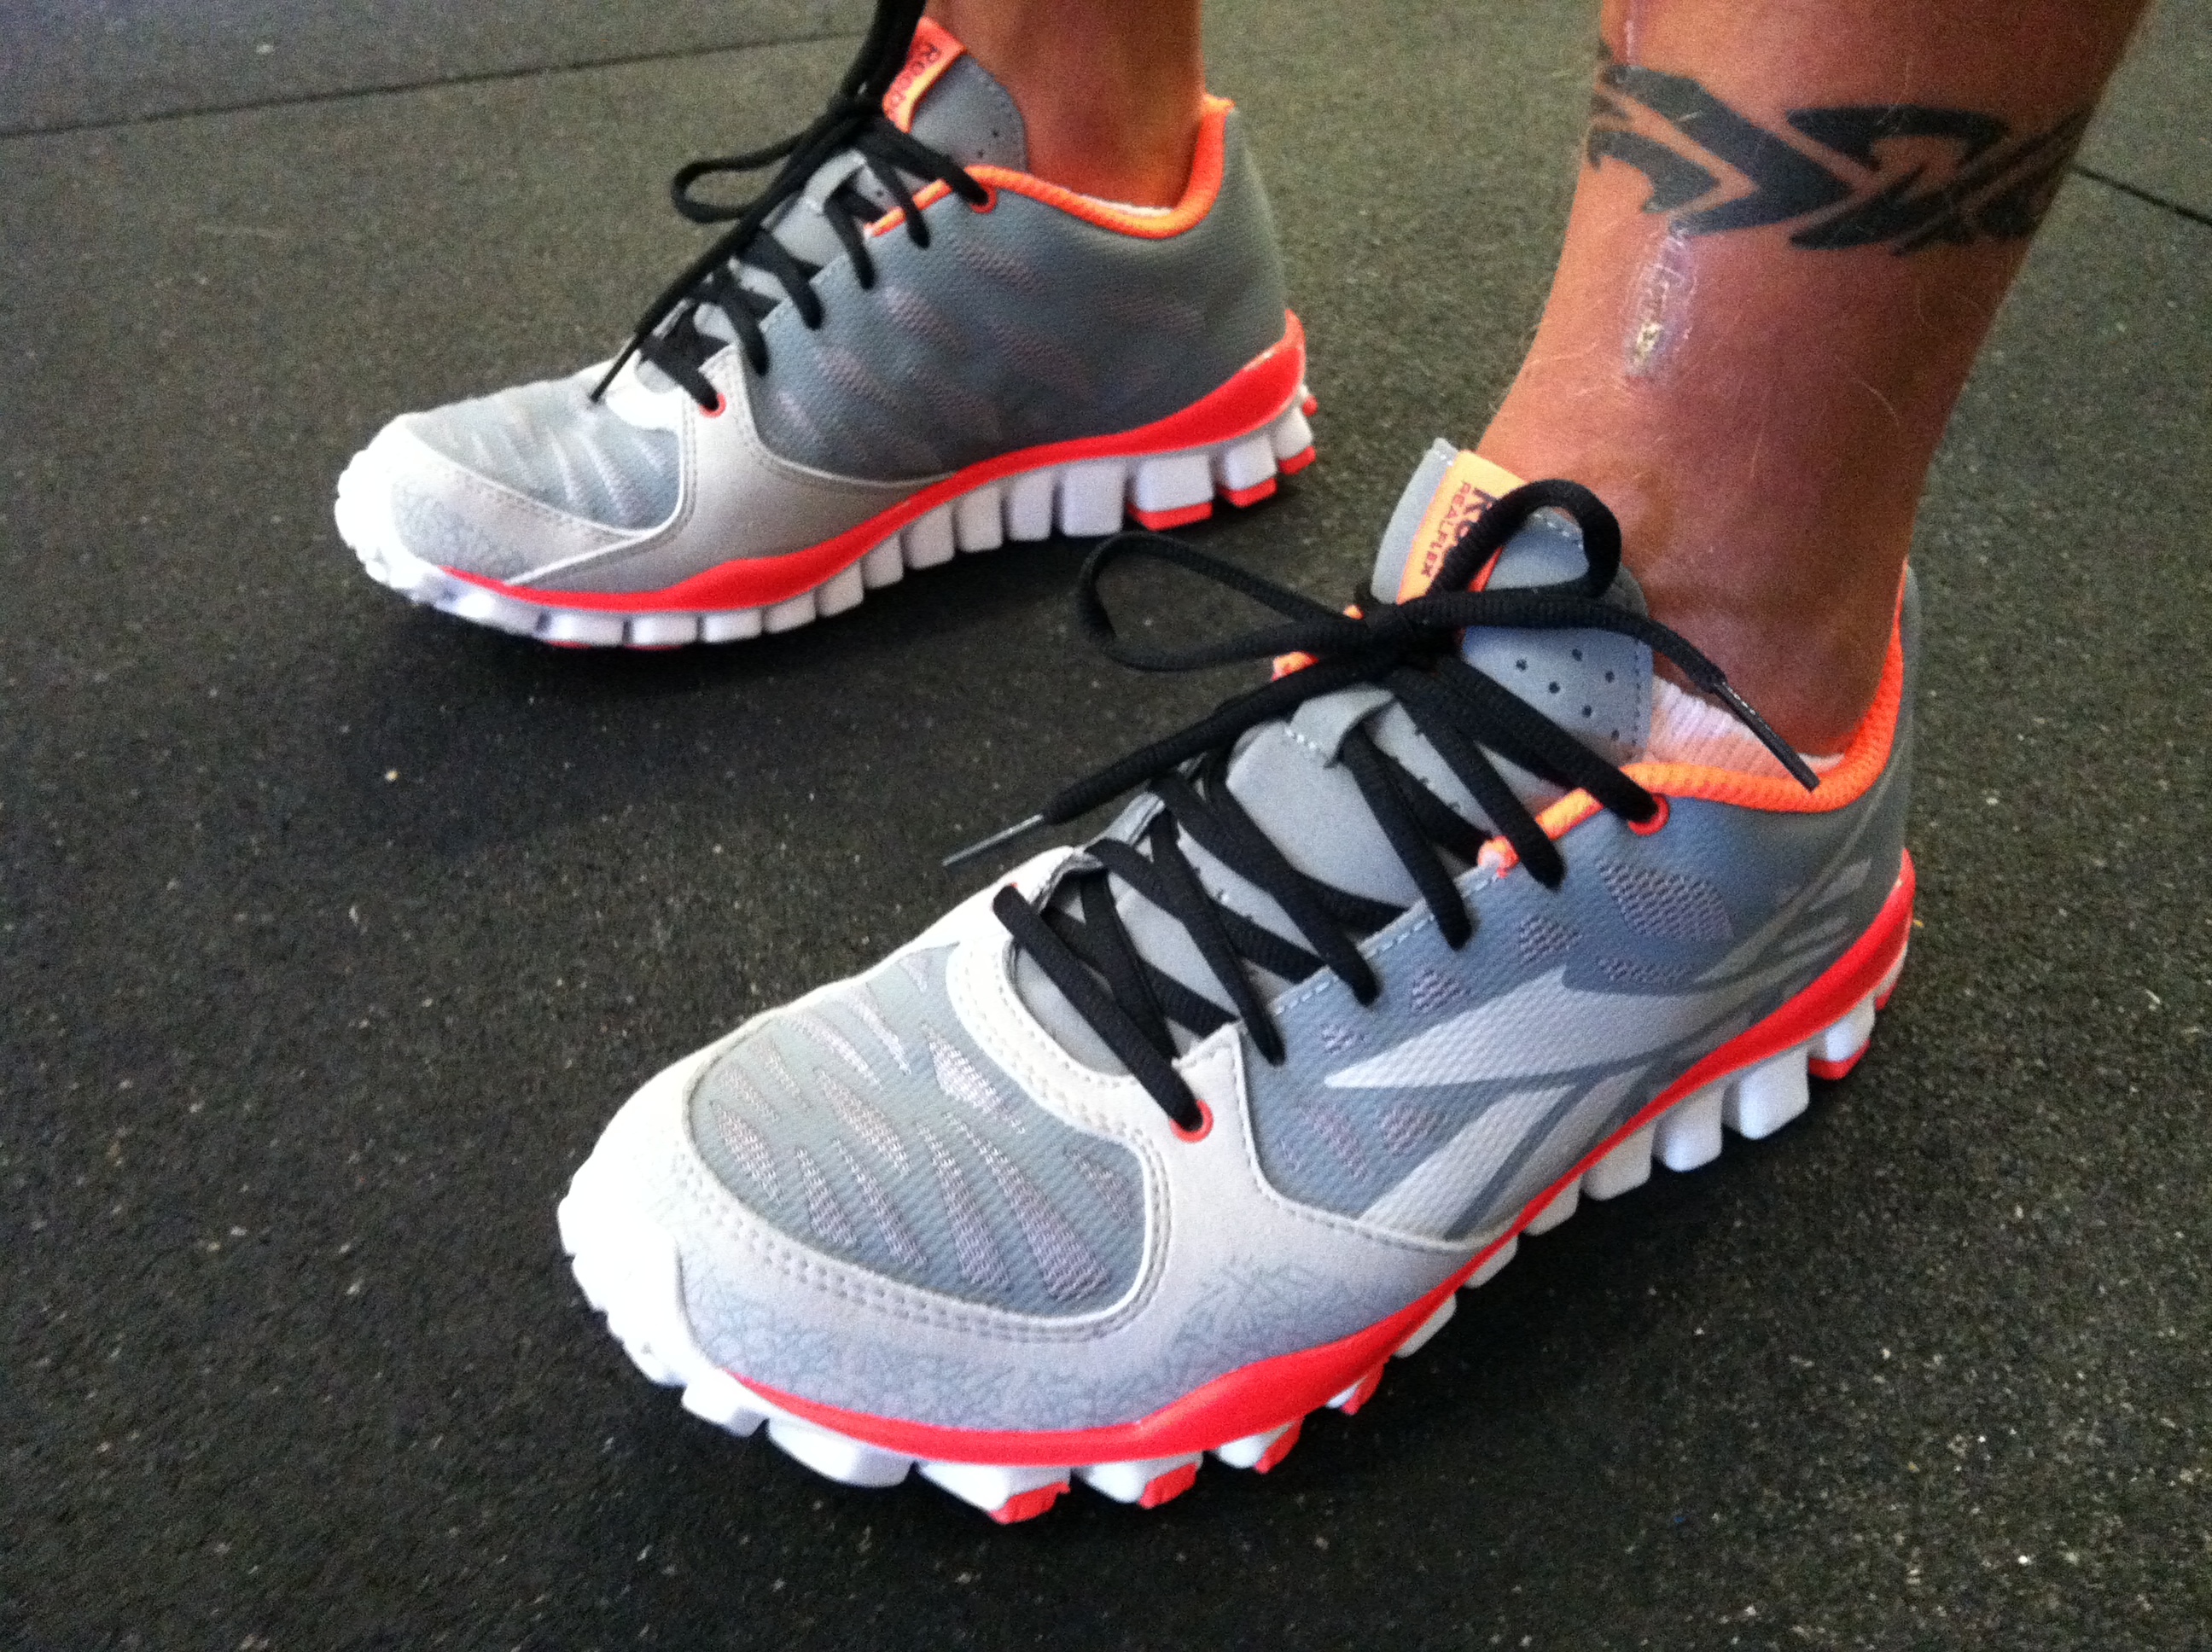 crossfit shoes for running